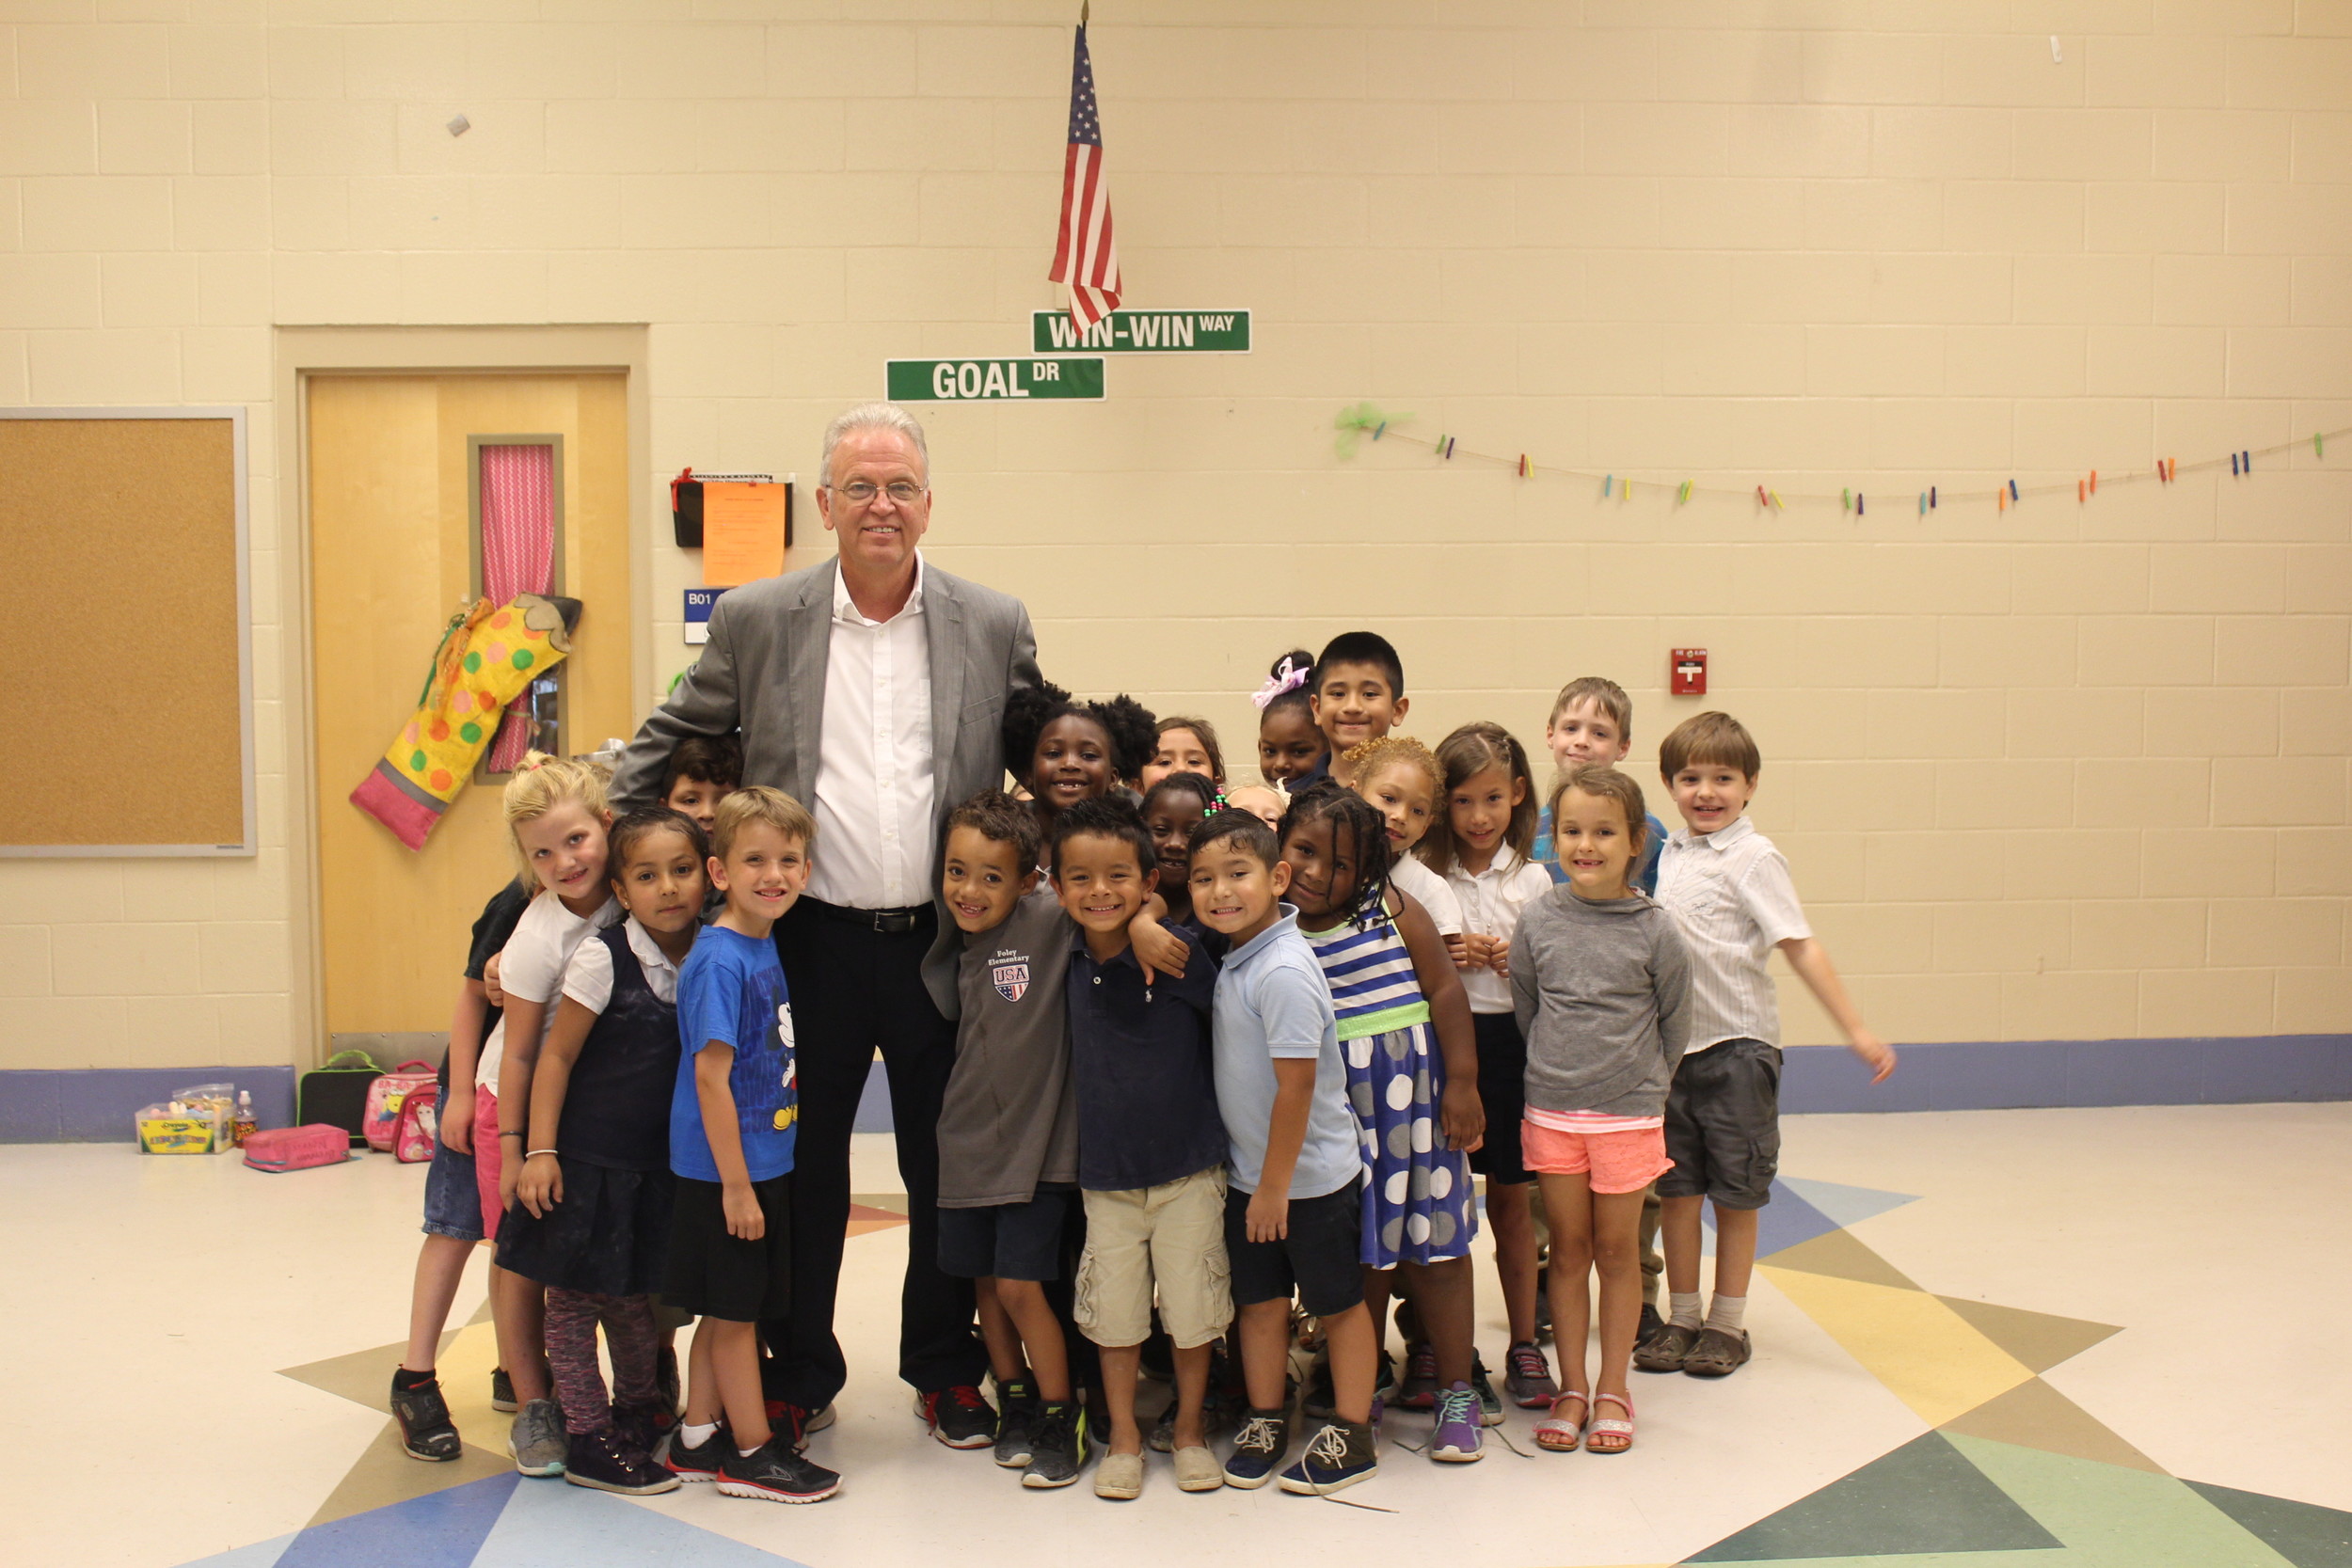 Foley Elementary School Principal Dr. William Lawrence is retiring after 21 years at the school and 40 years in education.